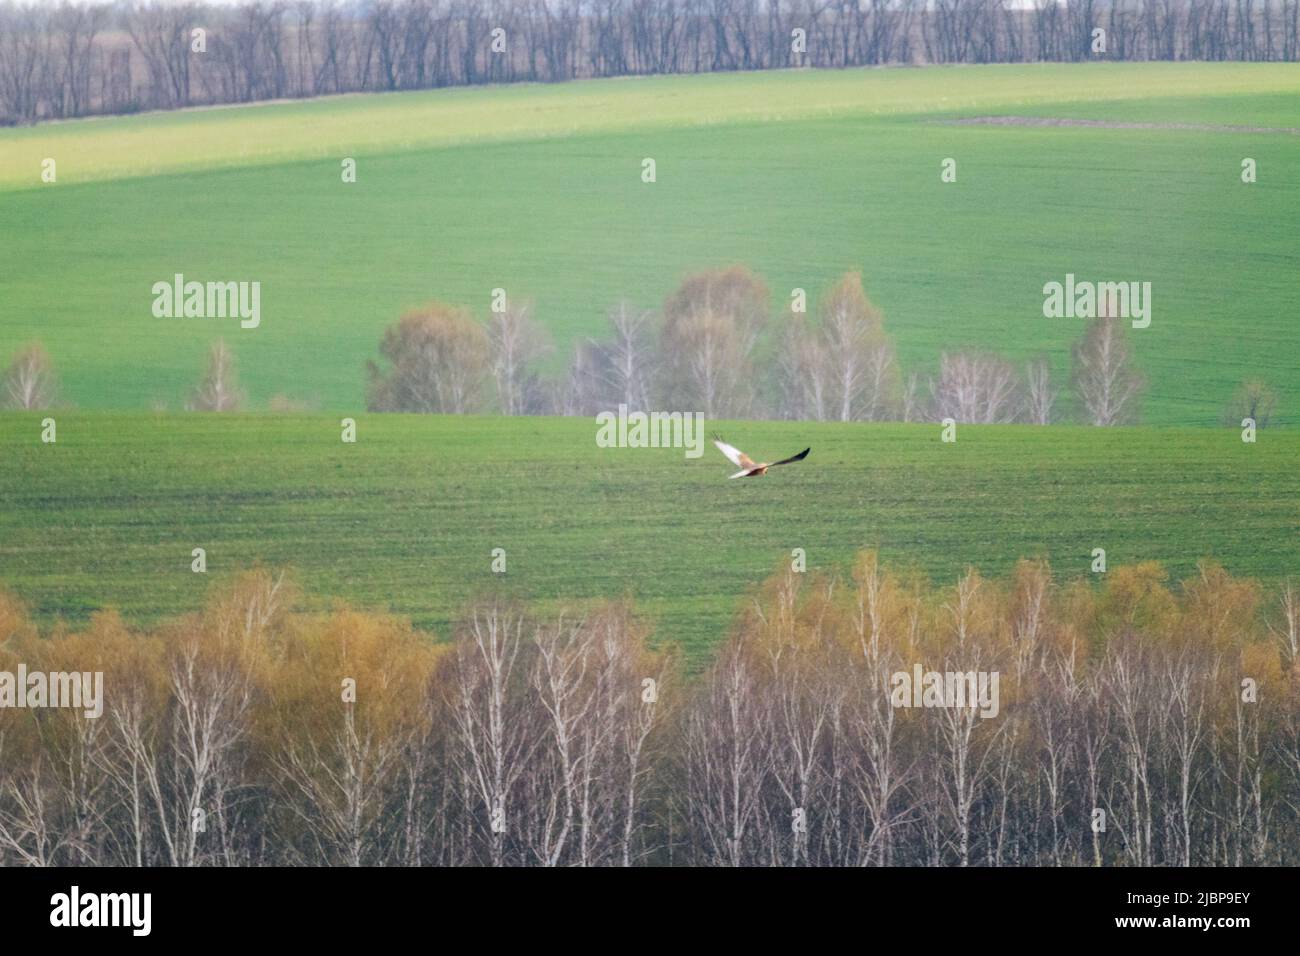 Wild hawk bird flying above young green and cultivated spring fields. Rural landscape with nice scenery Stock Photo